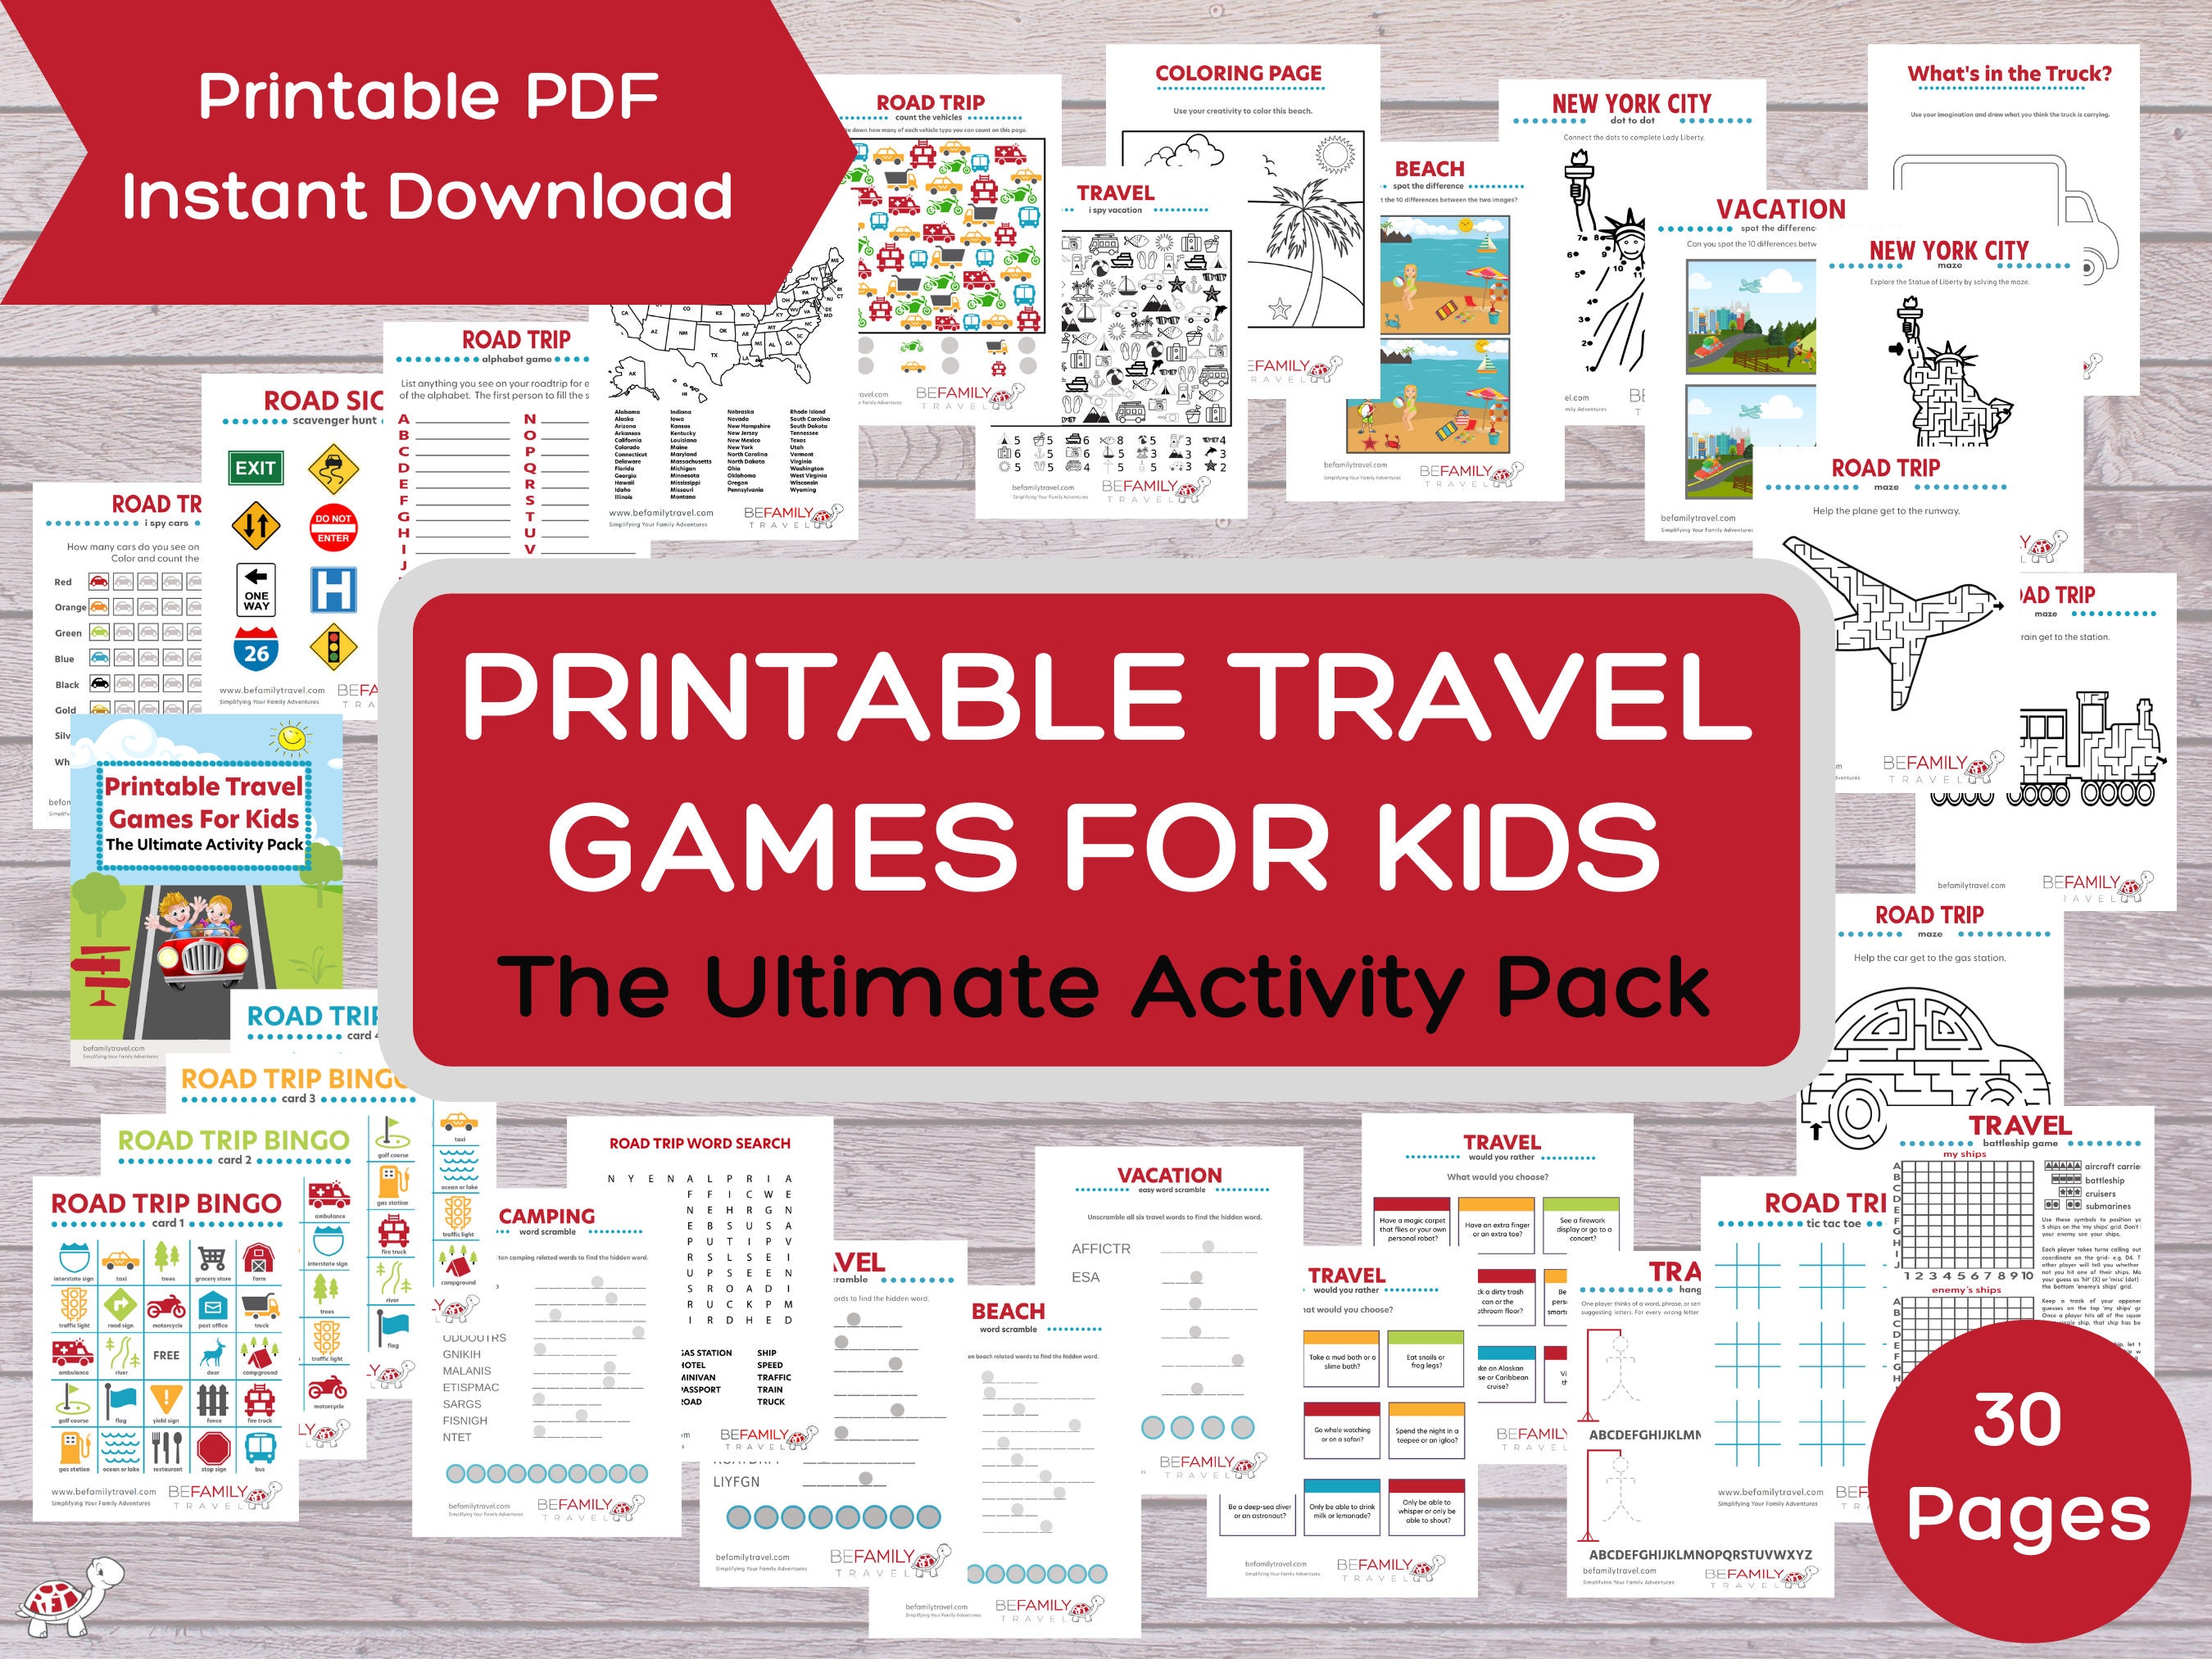 There are many travel games for kids during the trip.